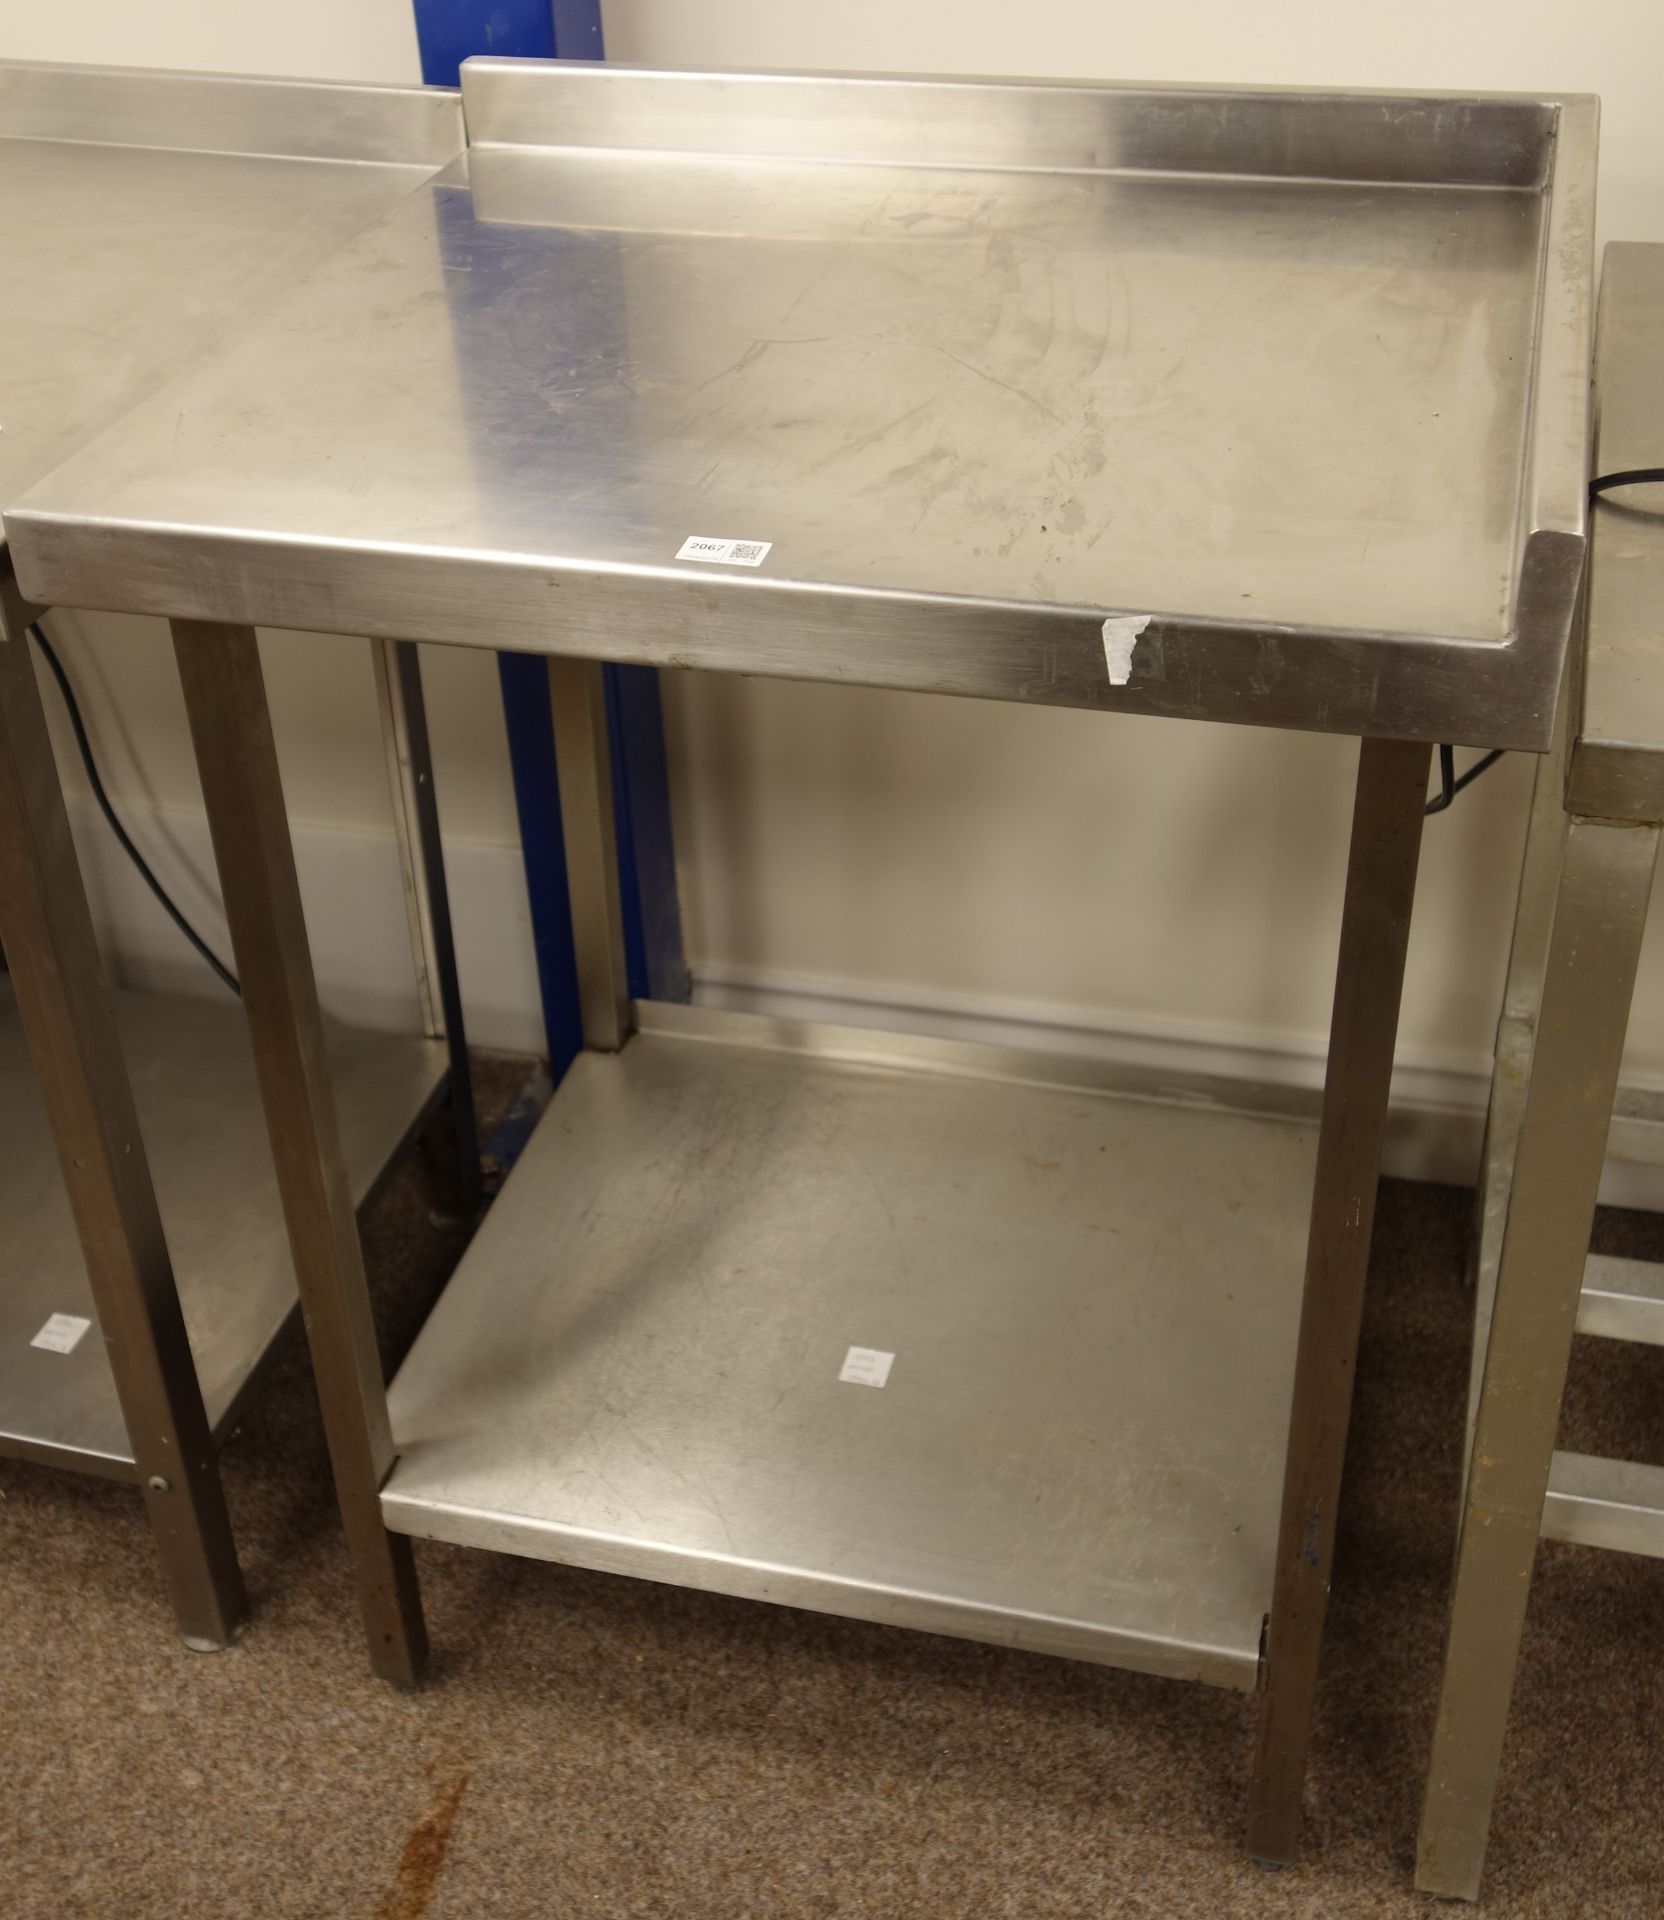 Commercial stainless steel two tier corner preparation table with raised back, 60cm x 70cm,